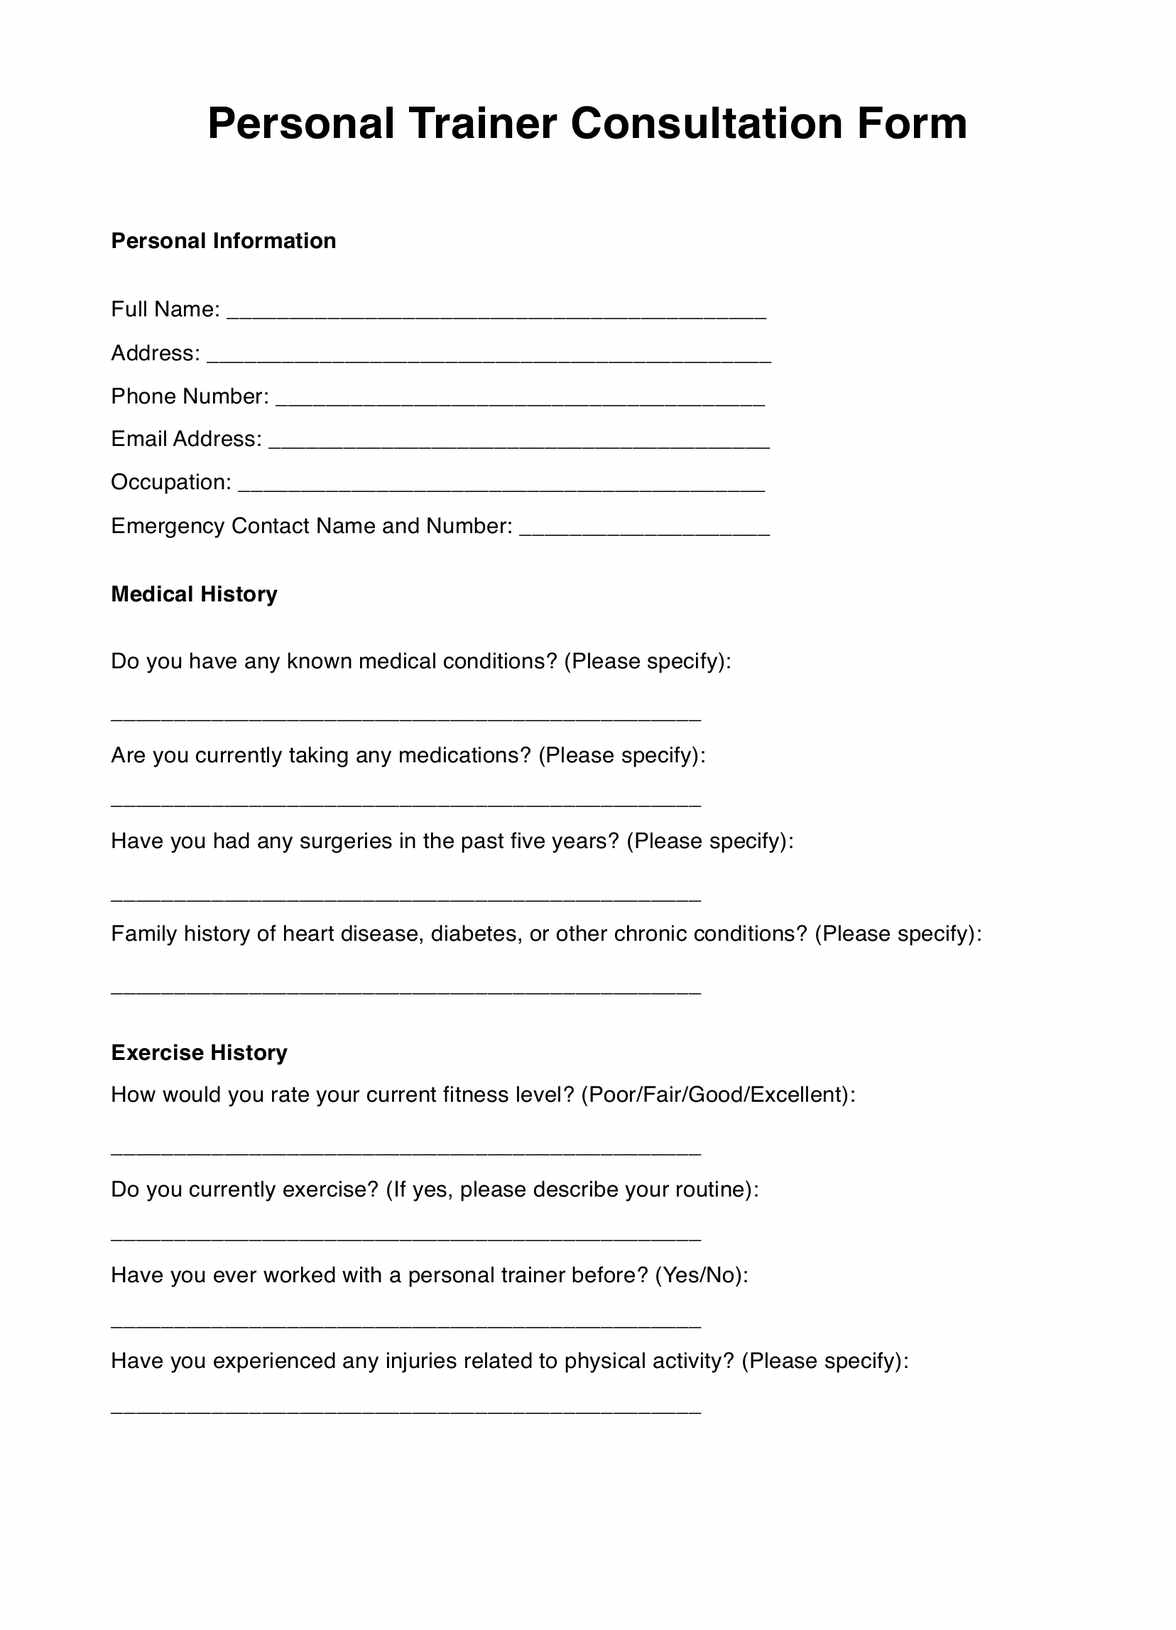 Personal Trainer Consultation Forms PDF Example